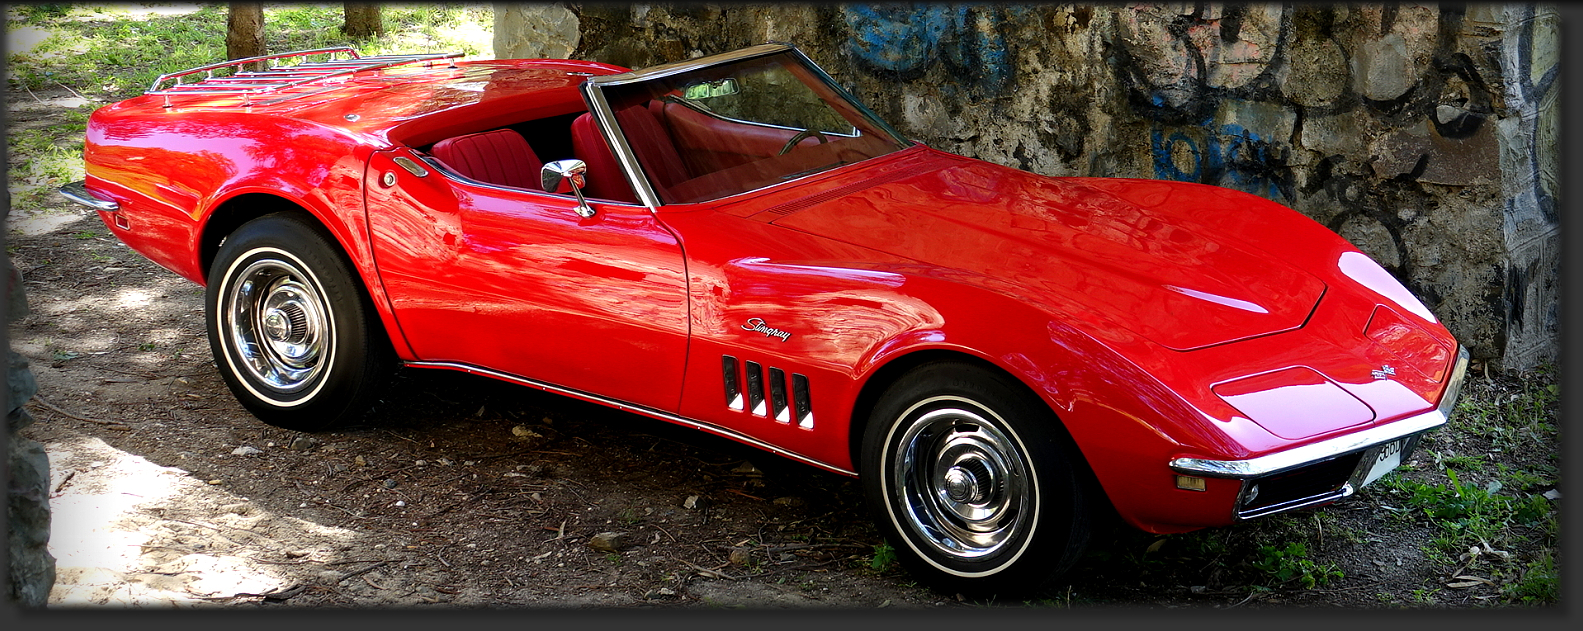 1968 Corvette Stingray for music videos, and photo shootings in Marbella